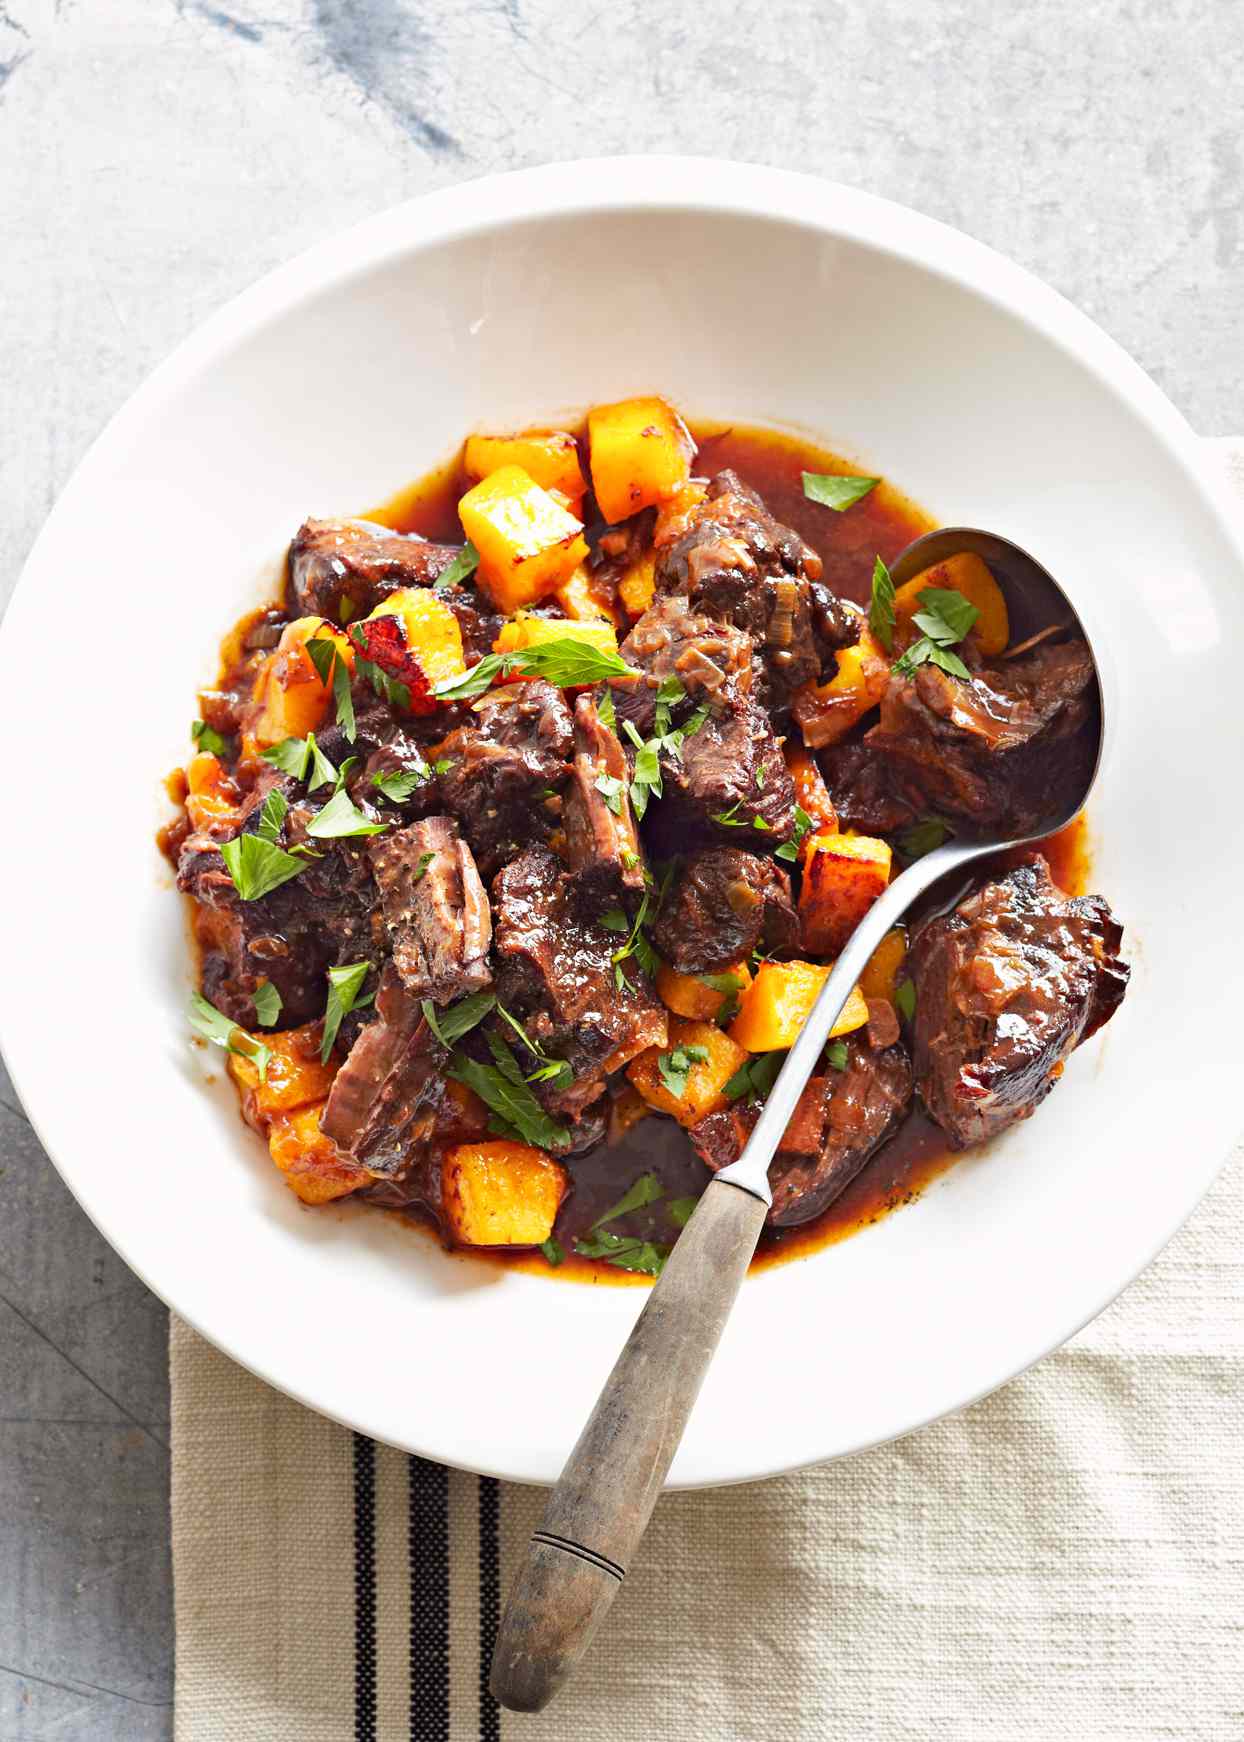 Rich Beef Stew with Bacon and Plums